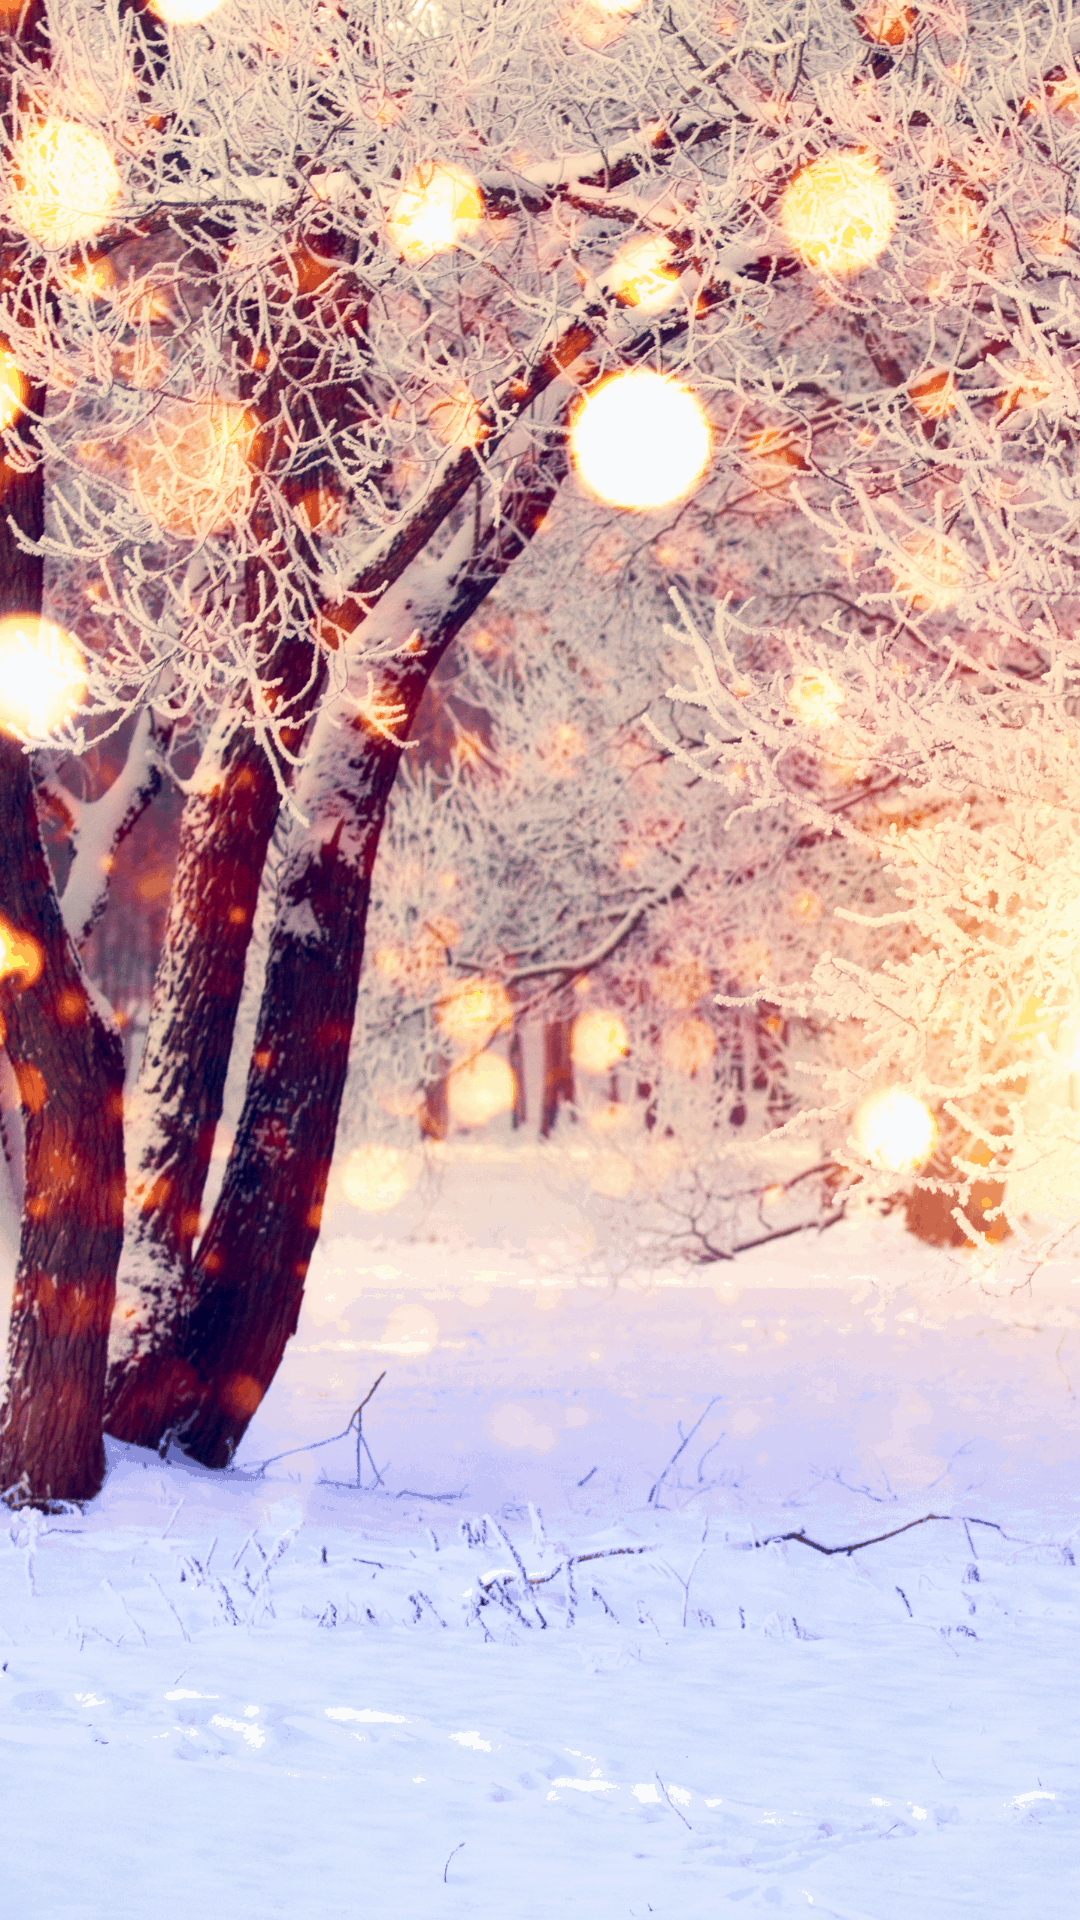 Christmas iPhone Wallpaper: Free Xmas Background to Download!